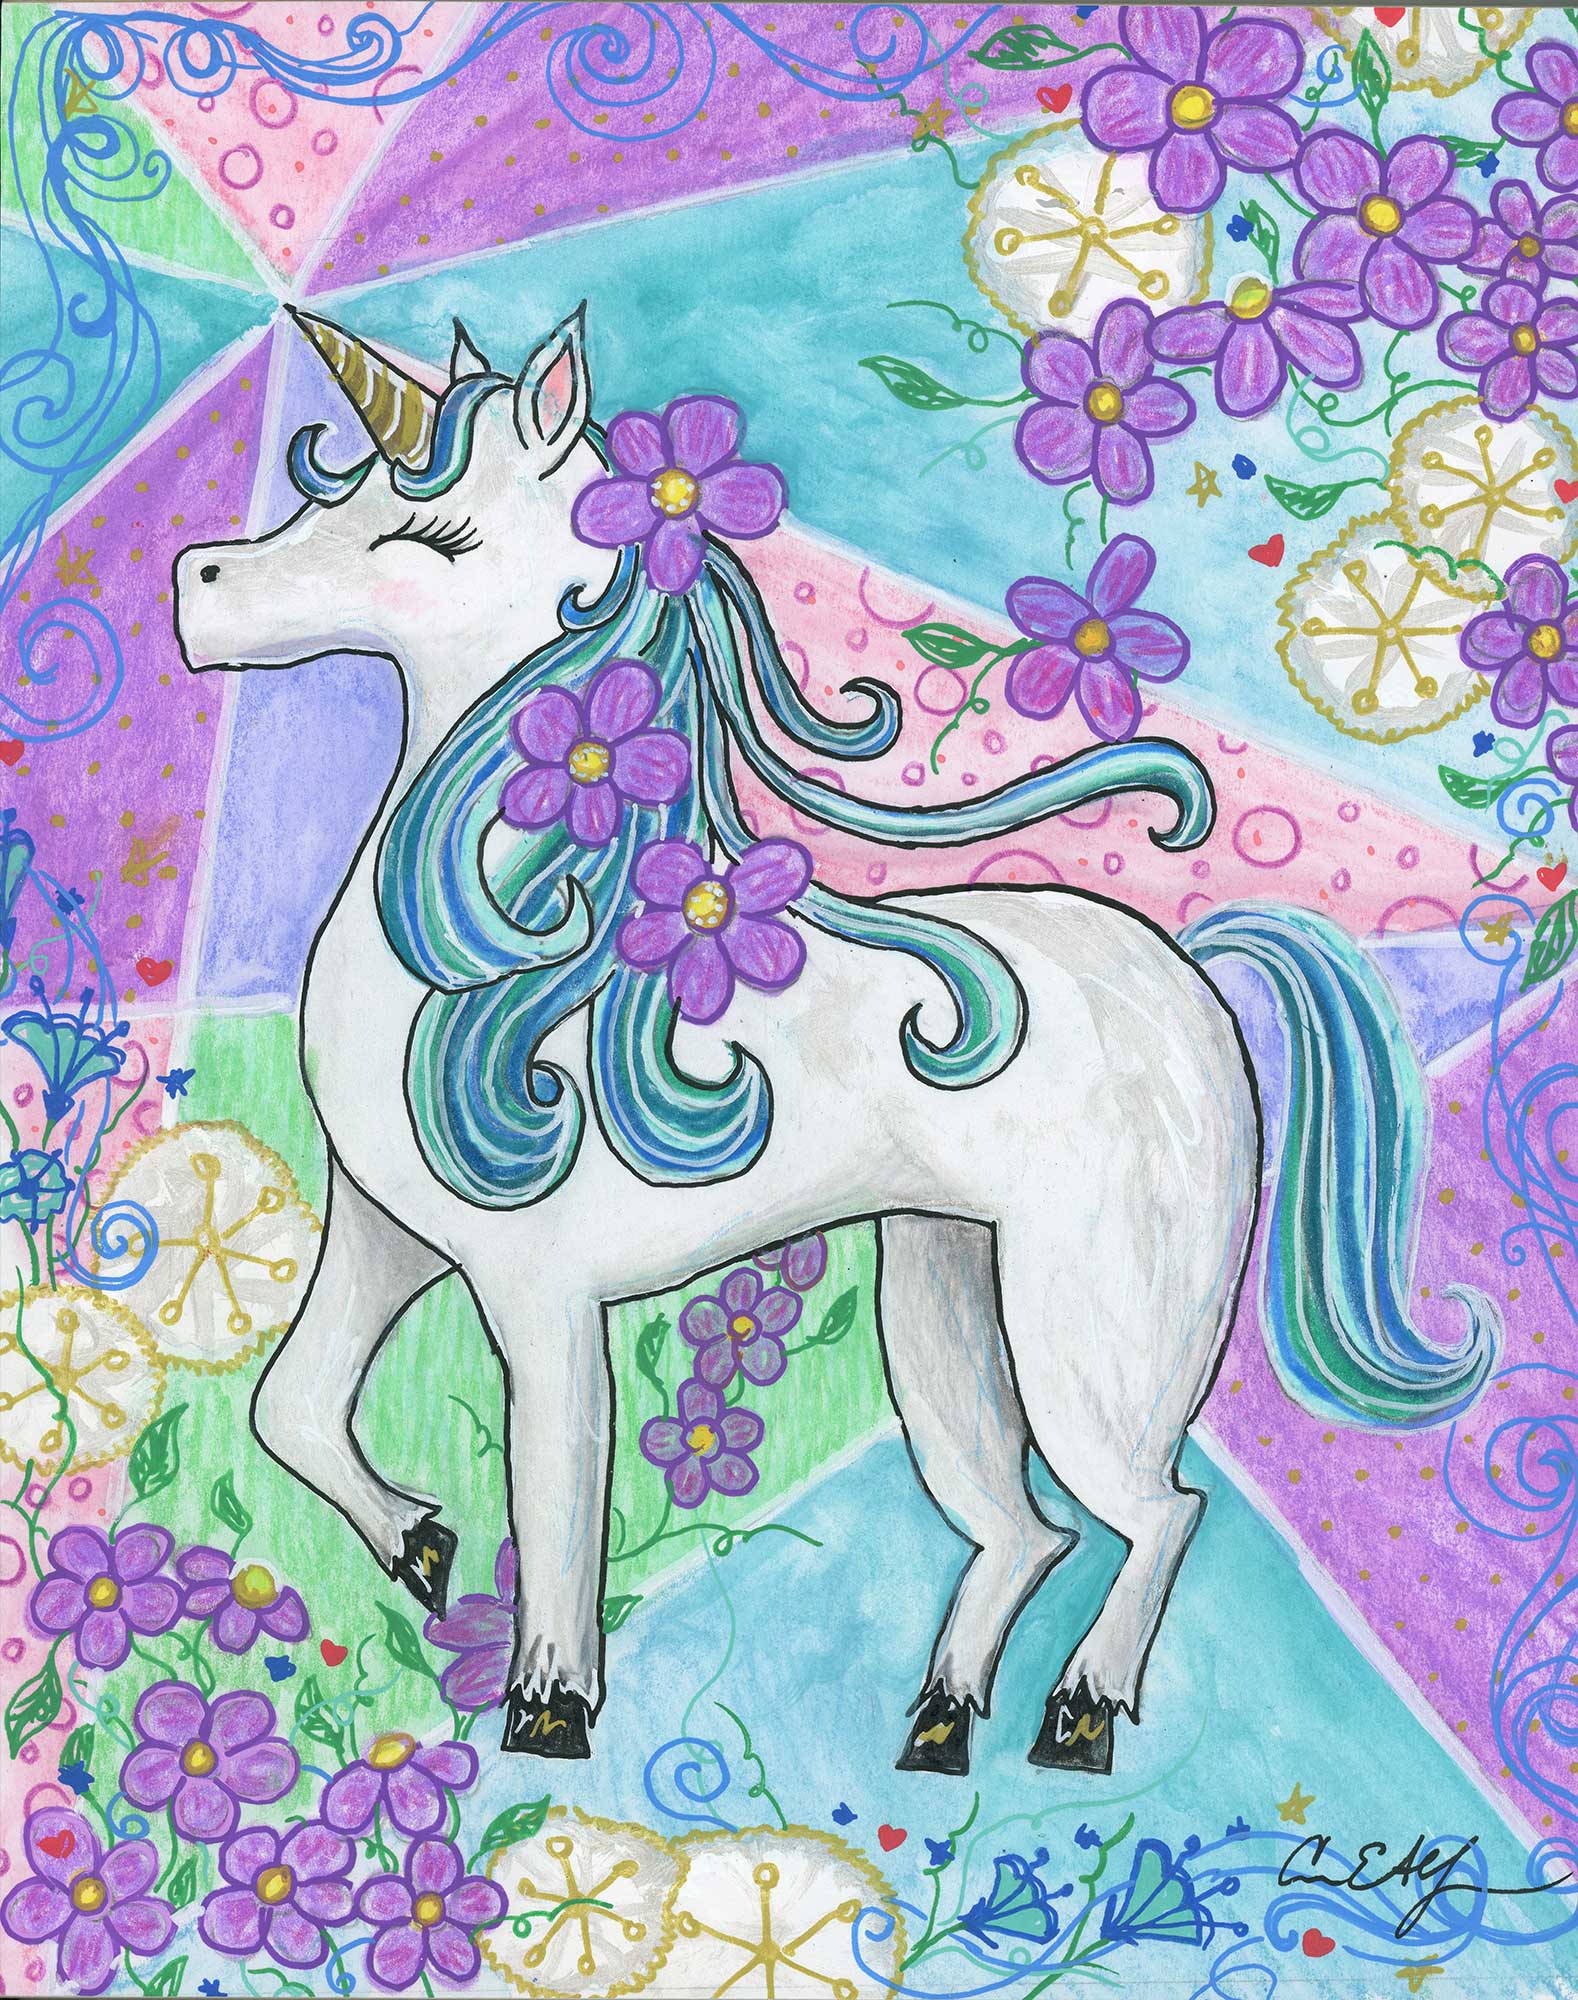 SOLD - "Unicorn with Purple Flowers", 8" x 10", mixed media